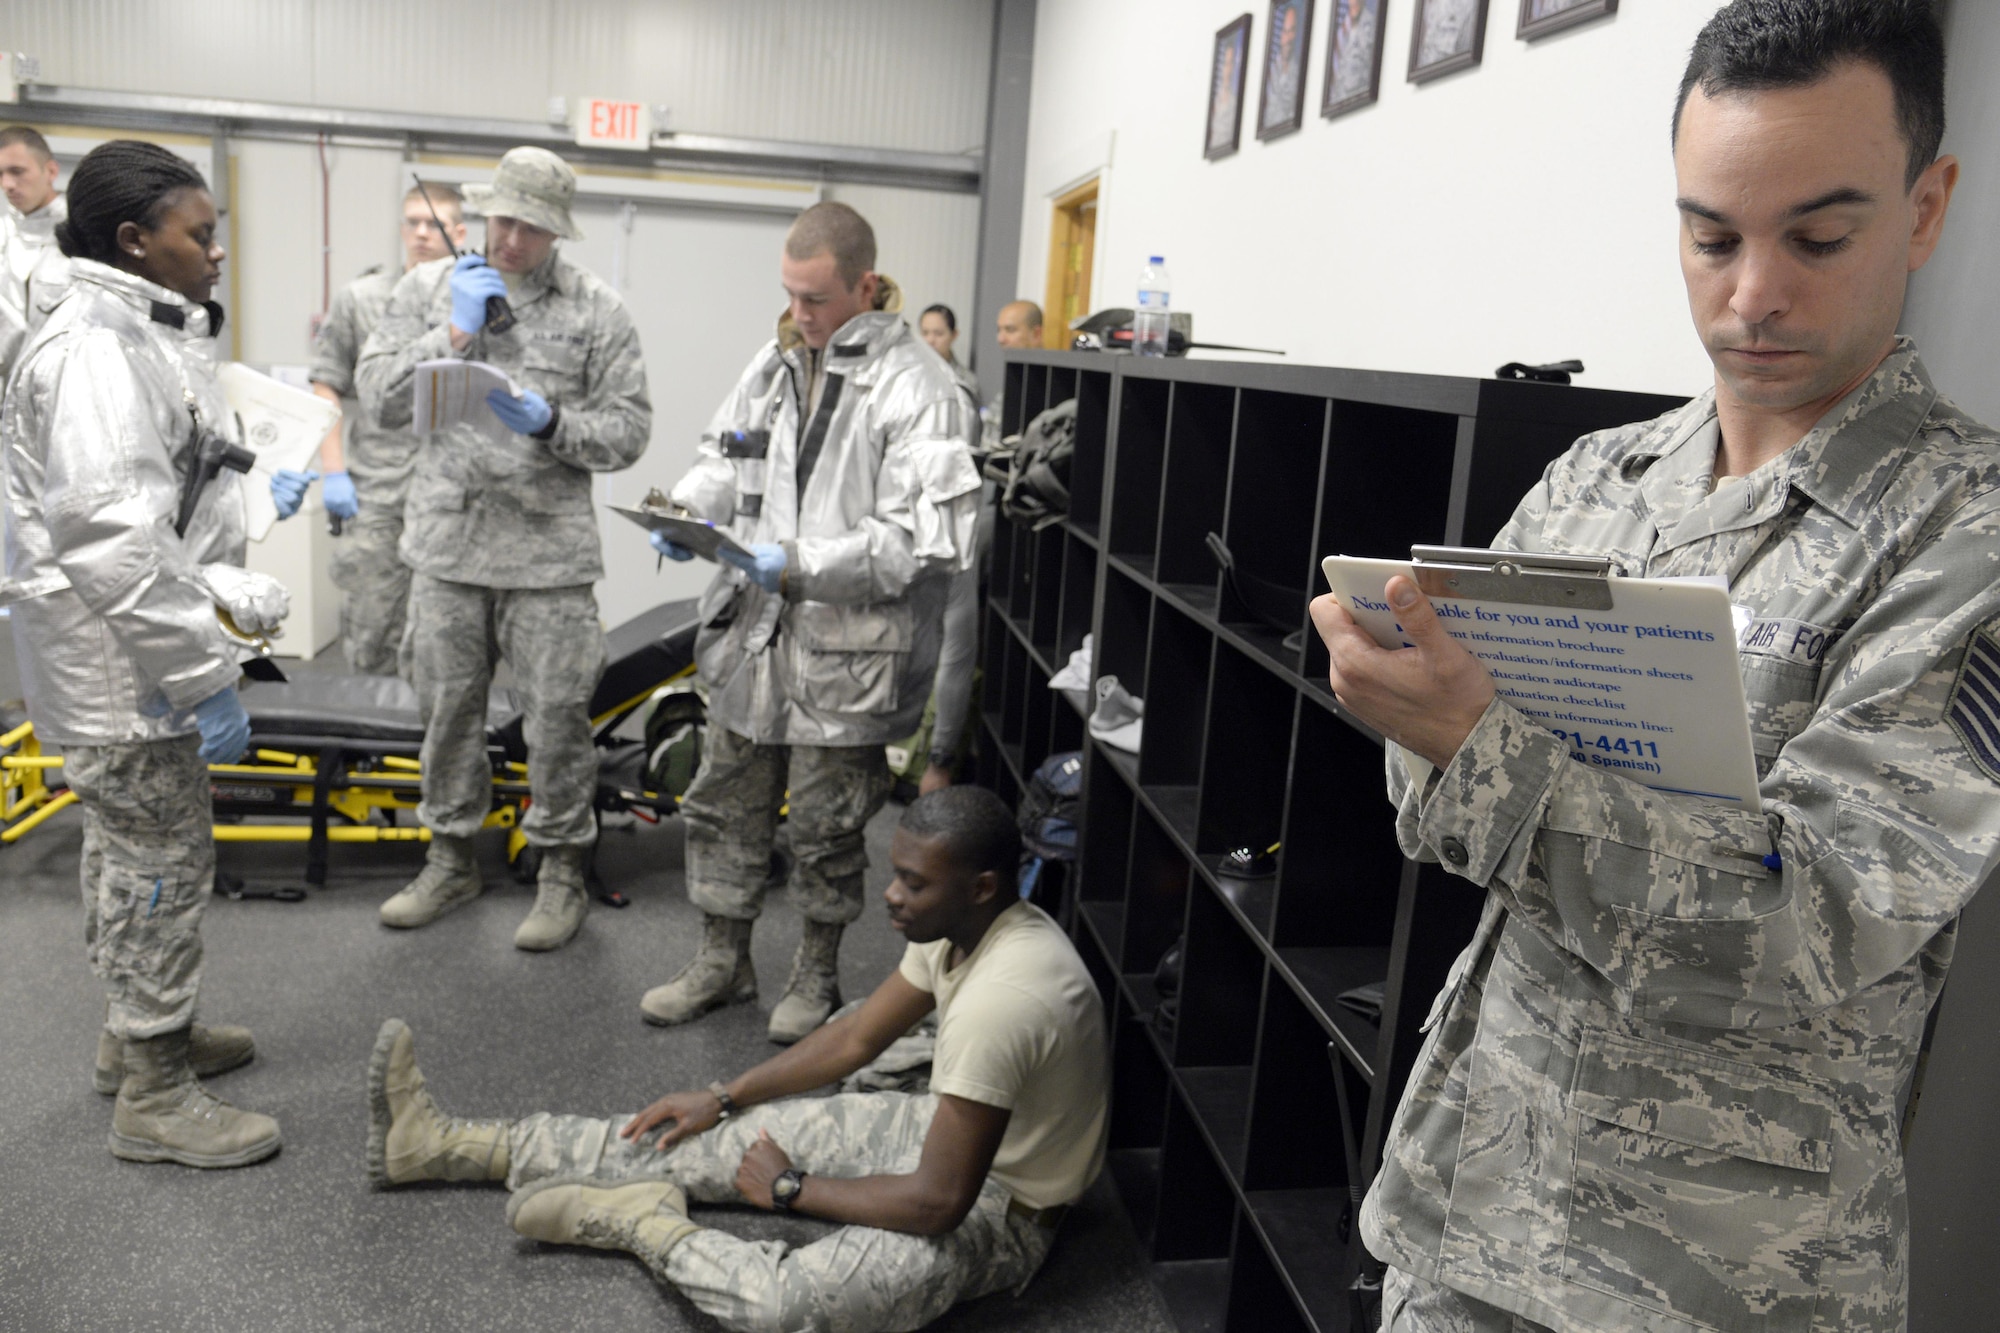 Tech. Sgt. Richard, wing inspection team member, evaluates first responders during a training exercise at an undisclosed location in Southwest Asia Jan. 15, 2015. Participants were evaluated and rated as minor, critical or significant with respect to mission impact. Richard is currently deployed from Joint Base McGuire-Dix-Lakehurst, N.J., and is a native of Olympia, Wash. (U.S. Air Force photo/Tech. Sgt. Marie Brown)